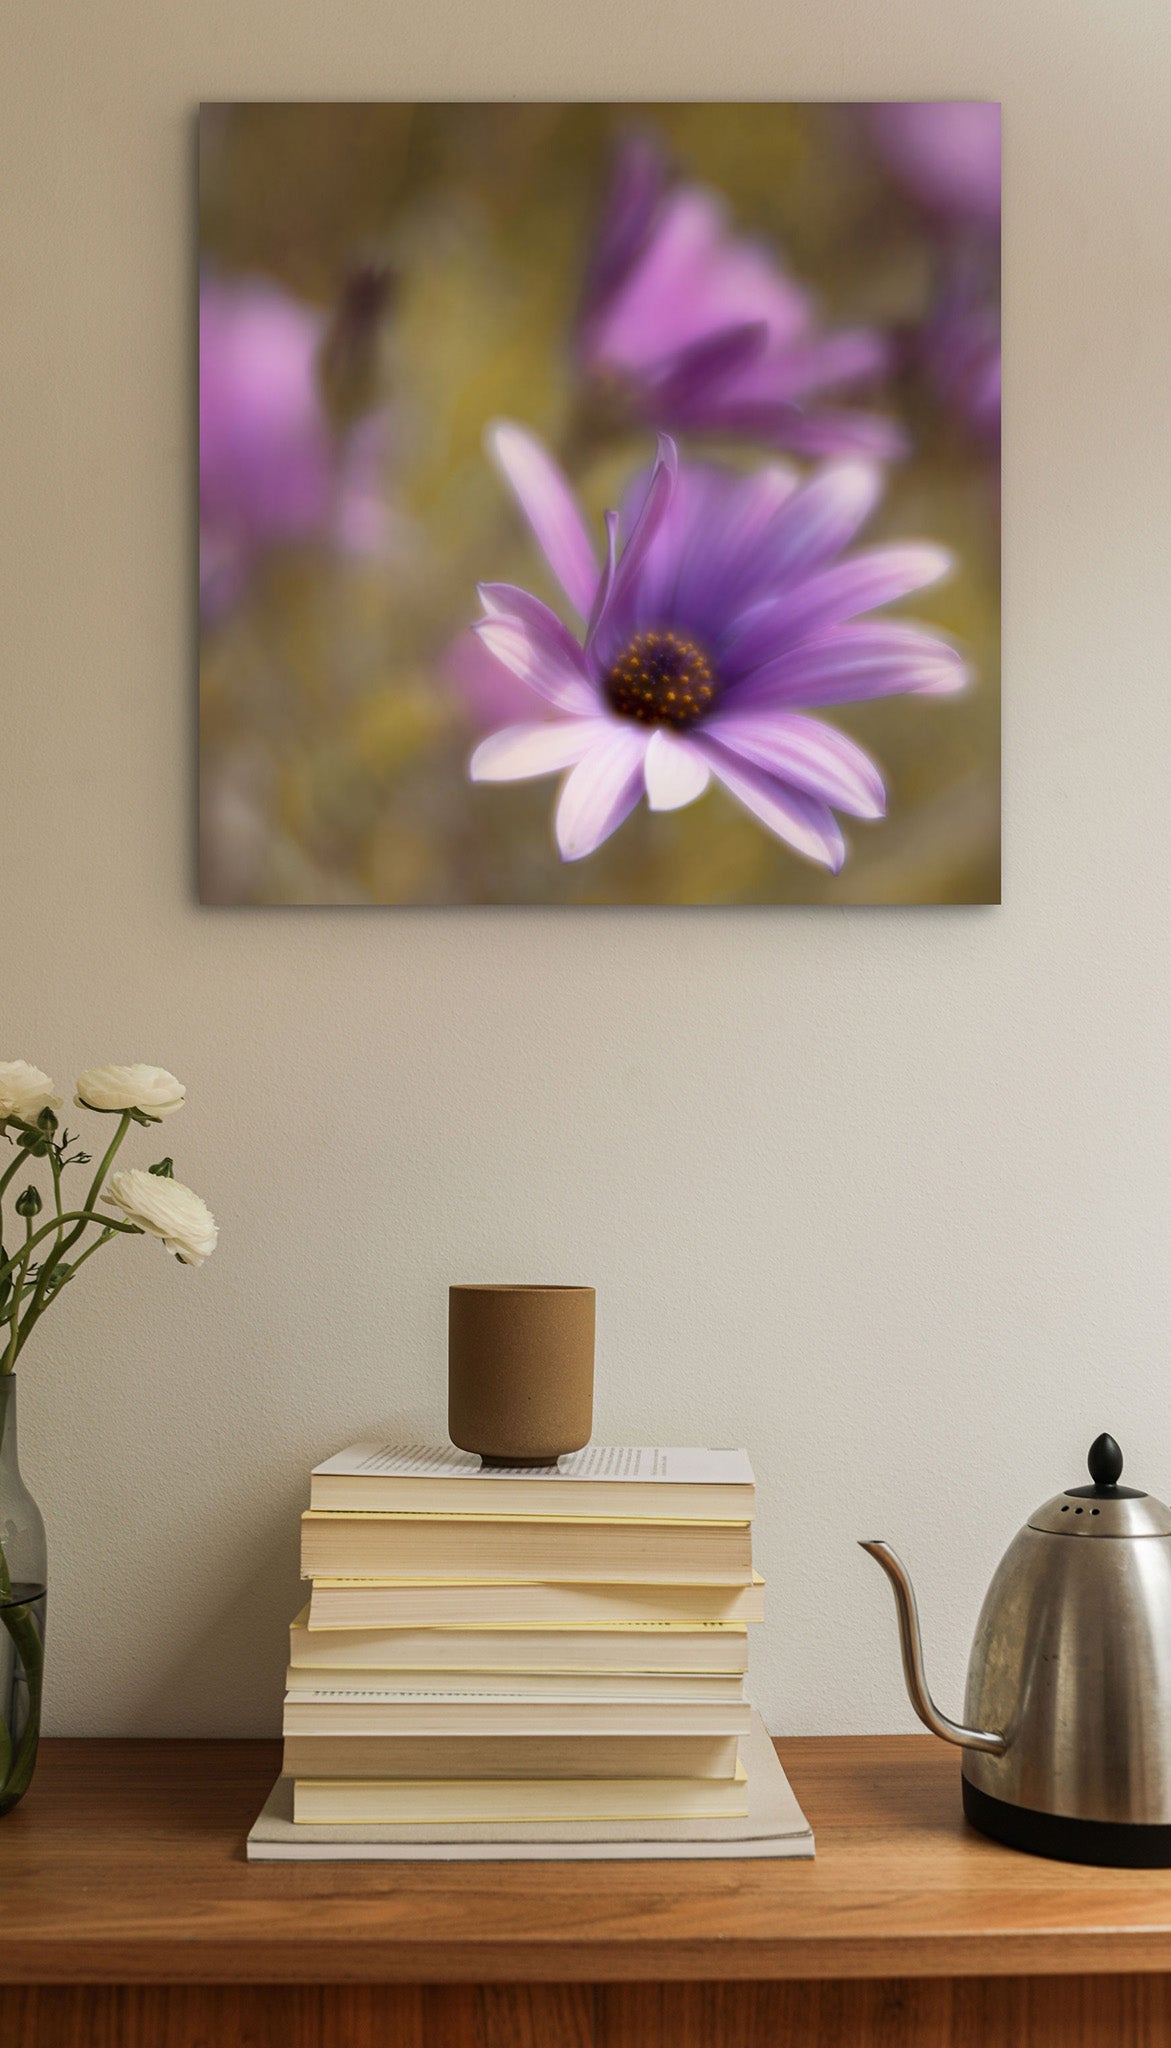 Picture hanging on a wall. There is also a desk with a stack of books. The picture is a fine art photograph of a purple daisy blowing the in the wind. The photograph is by Cameron Dreaux. 